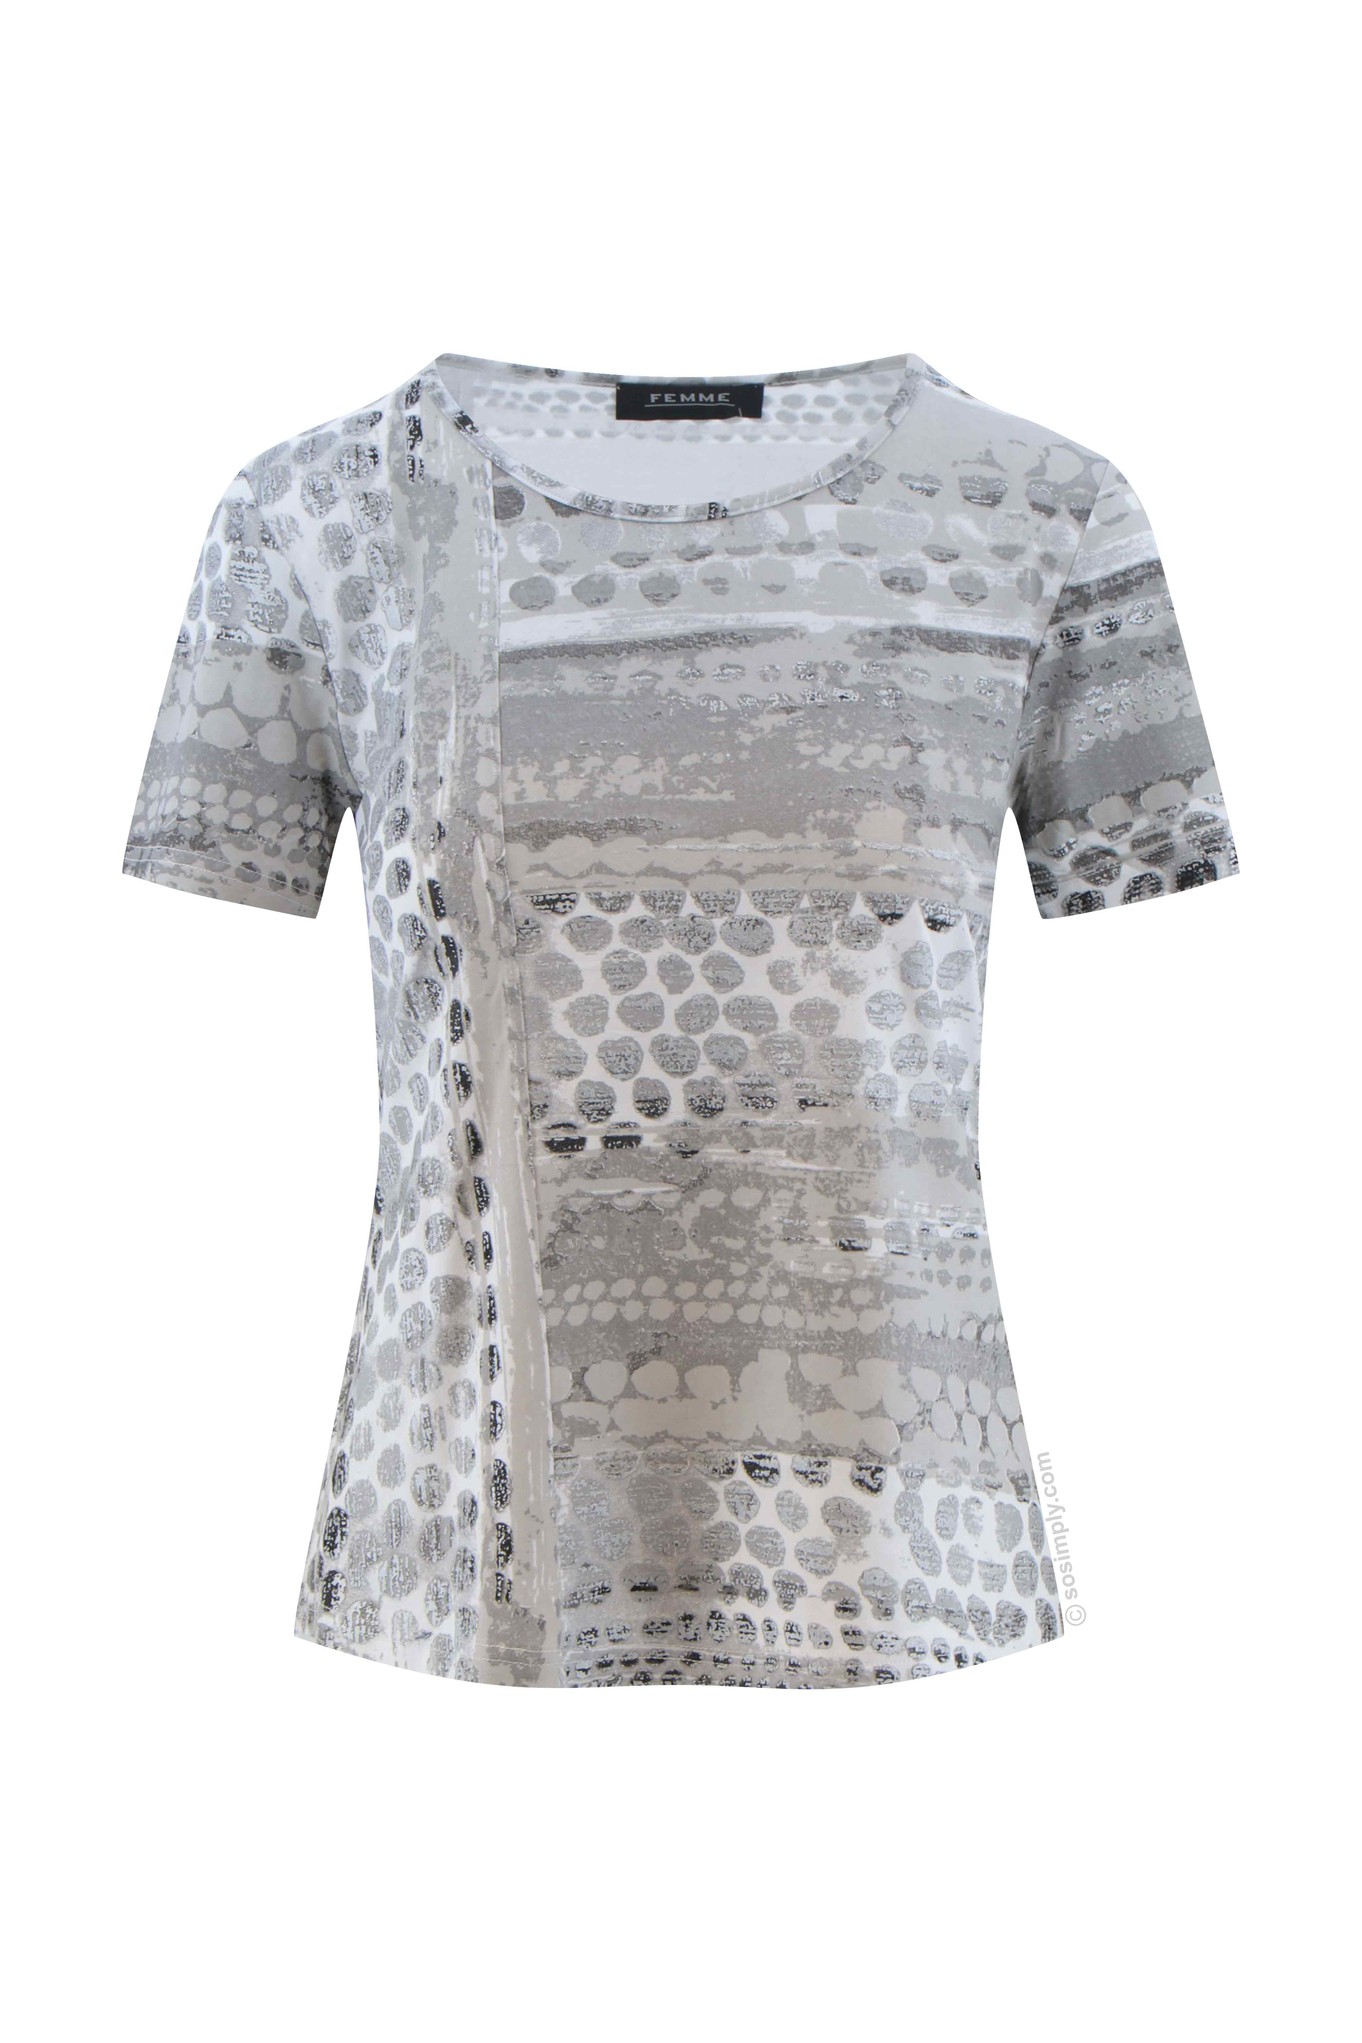 Femme Gracie Abstract Pattern T Shirt